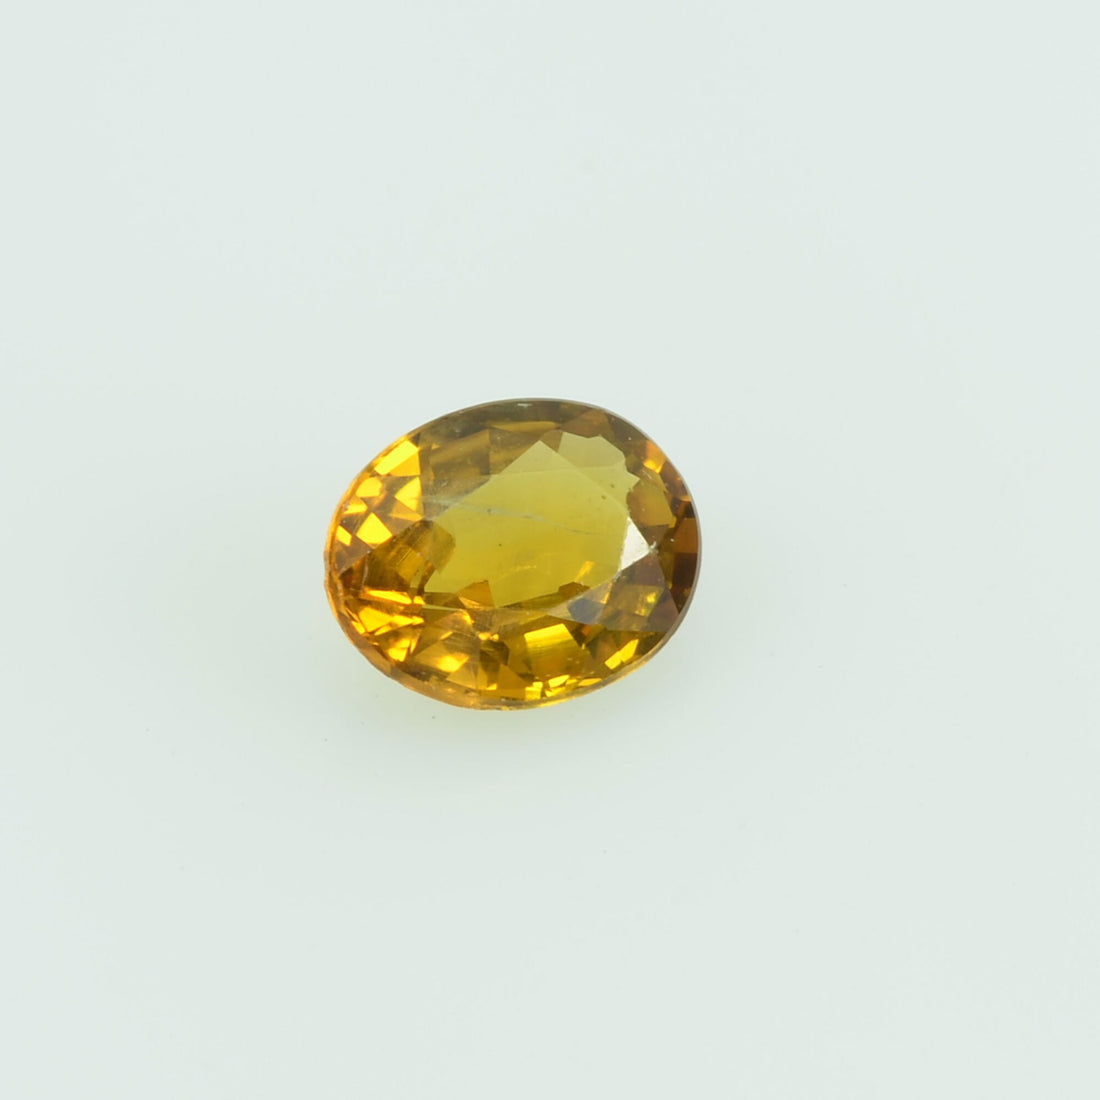 0.36 Cts Natural Yellow Sapphire Loose Gemstone Oval Cut